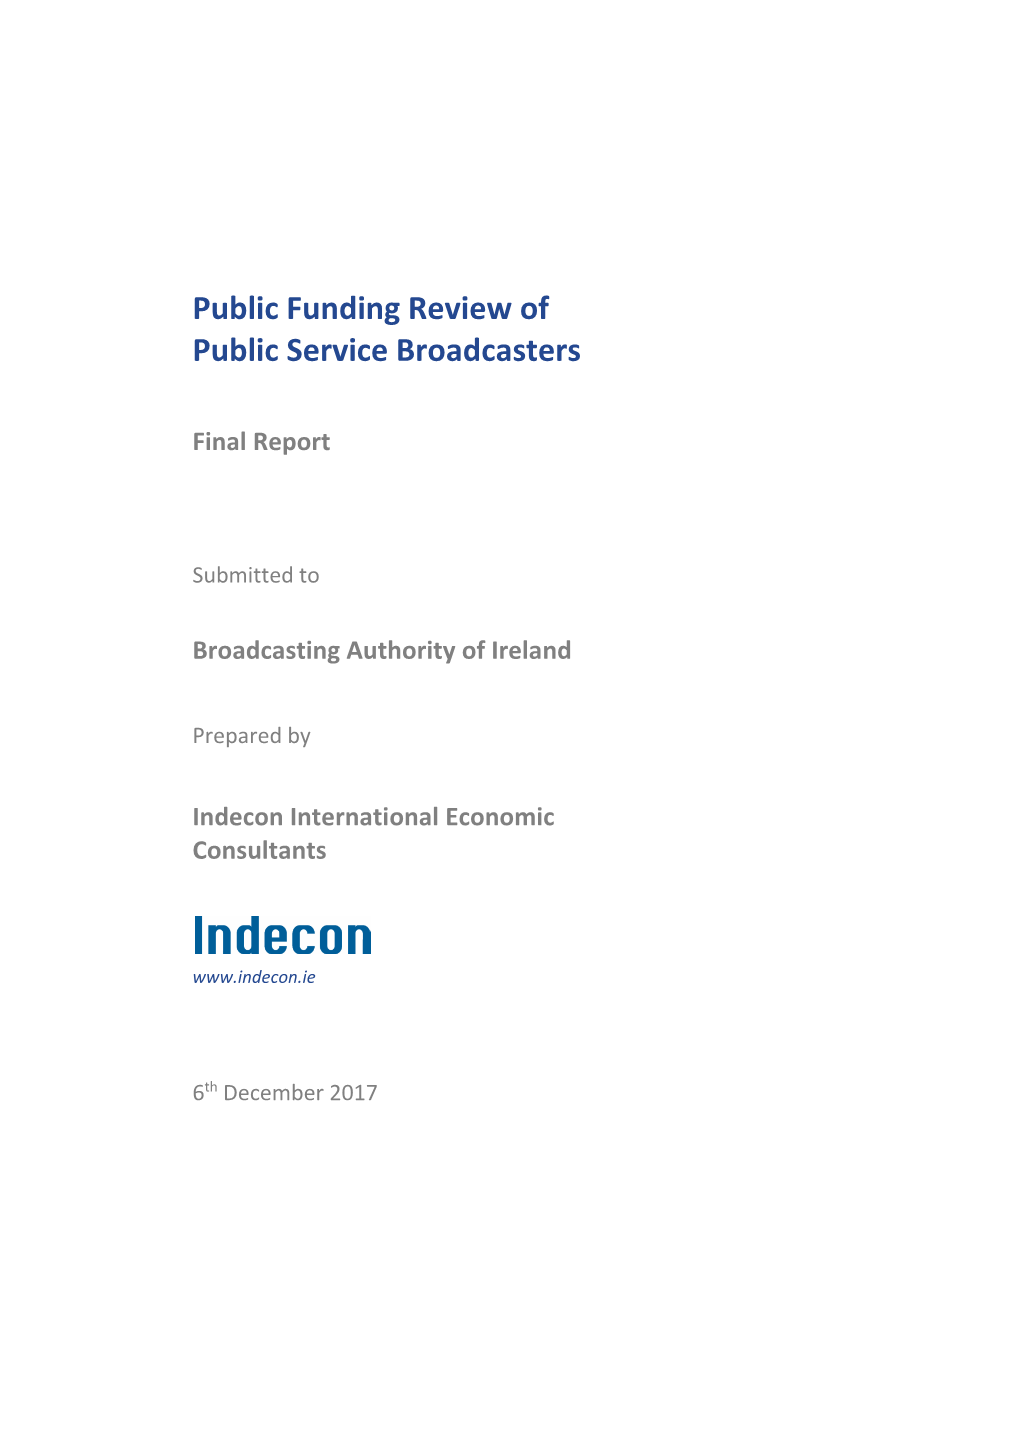 Annual Review of Public Funding 2016